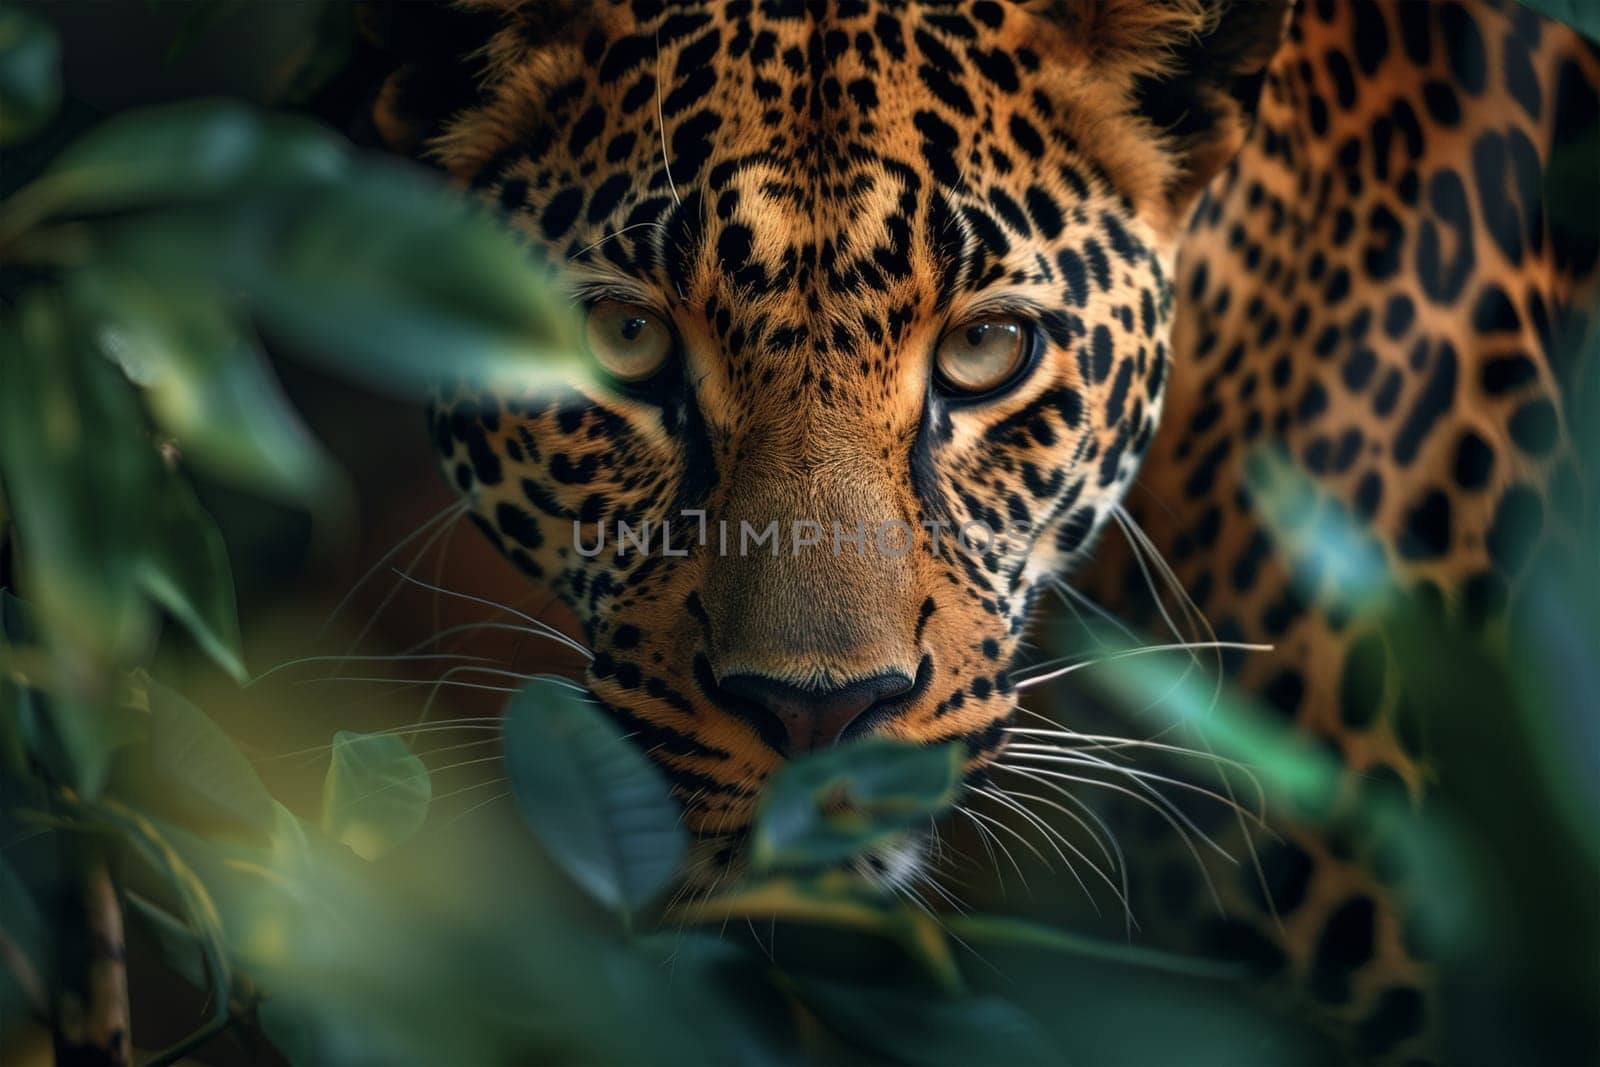 A close view of a leopard perched in a tree, observing its surroundings with a focused gaze.